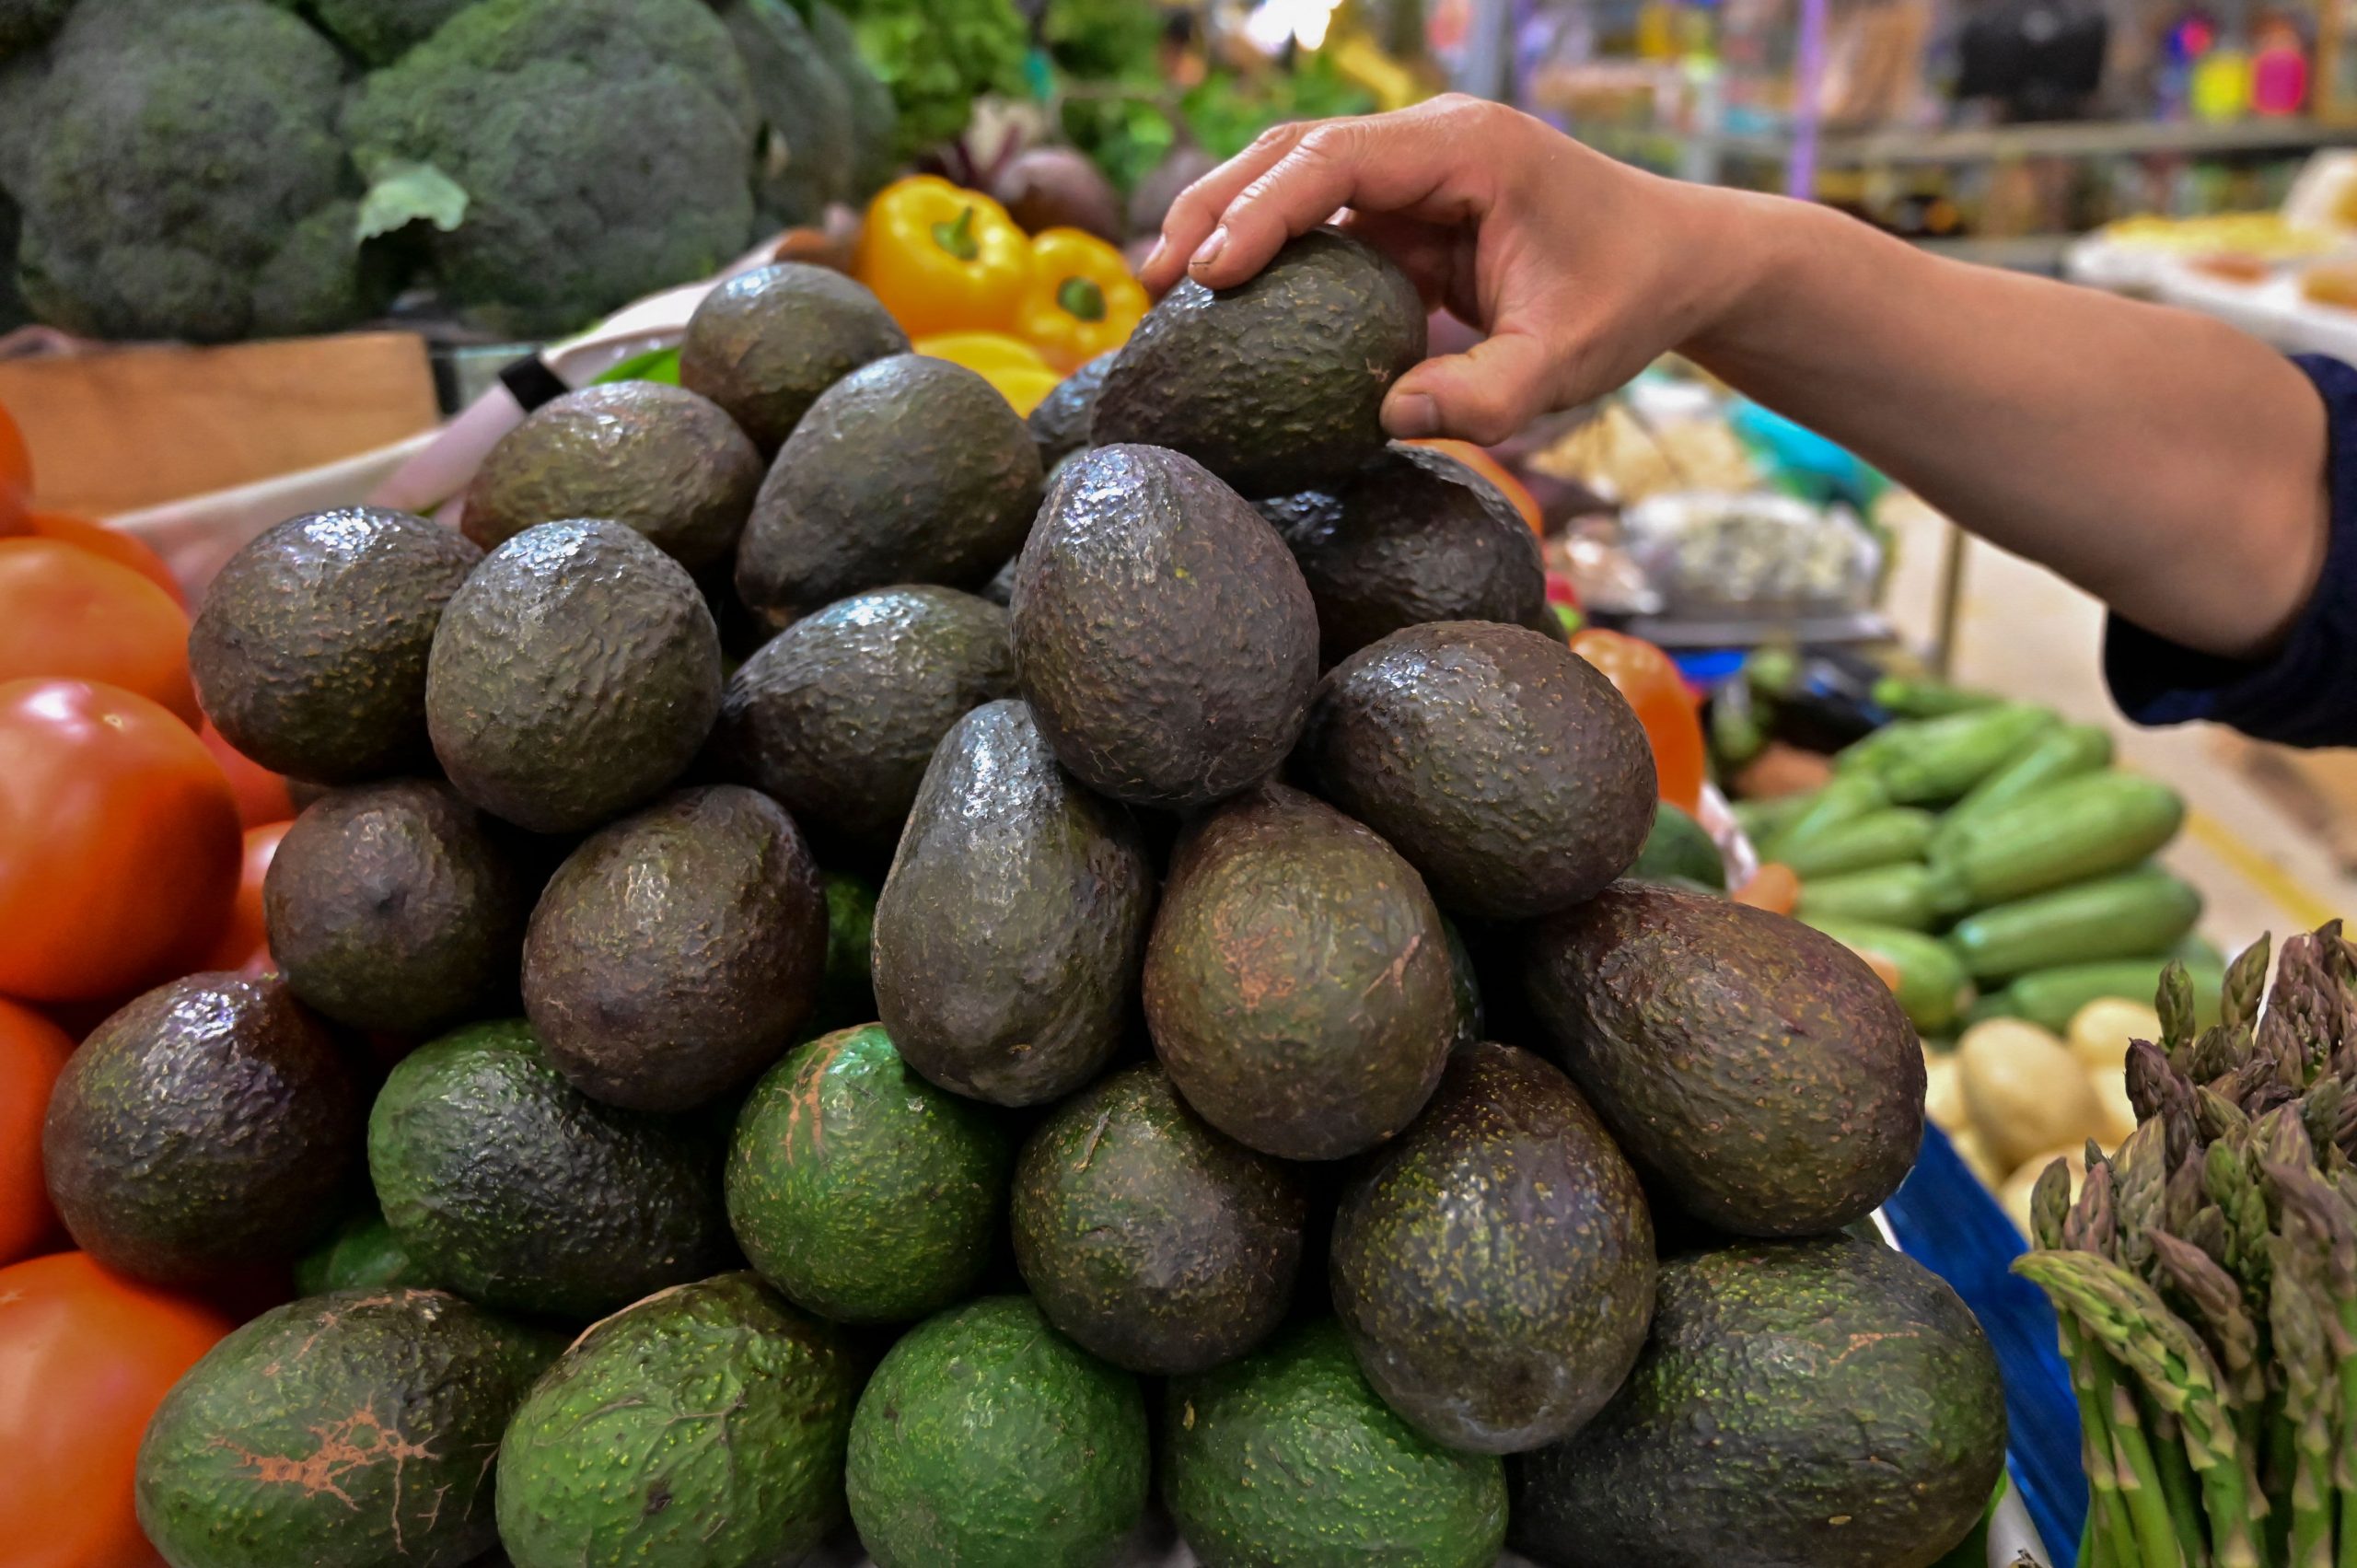 U.S. government allows Mexican avocado imports to resume